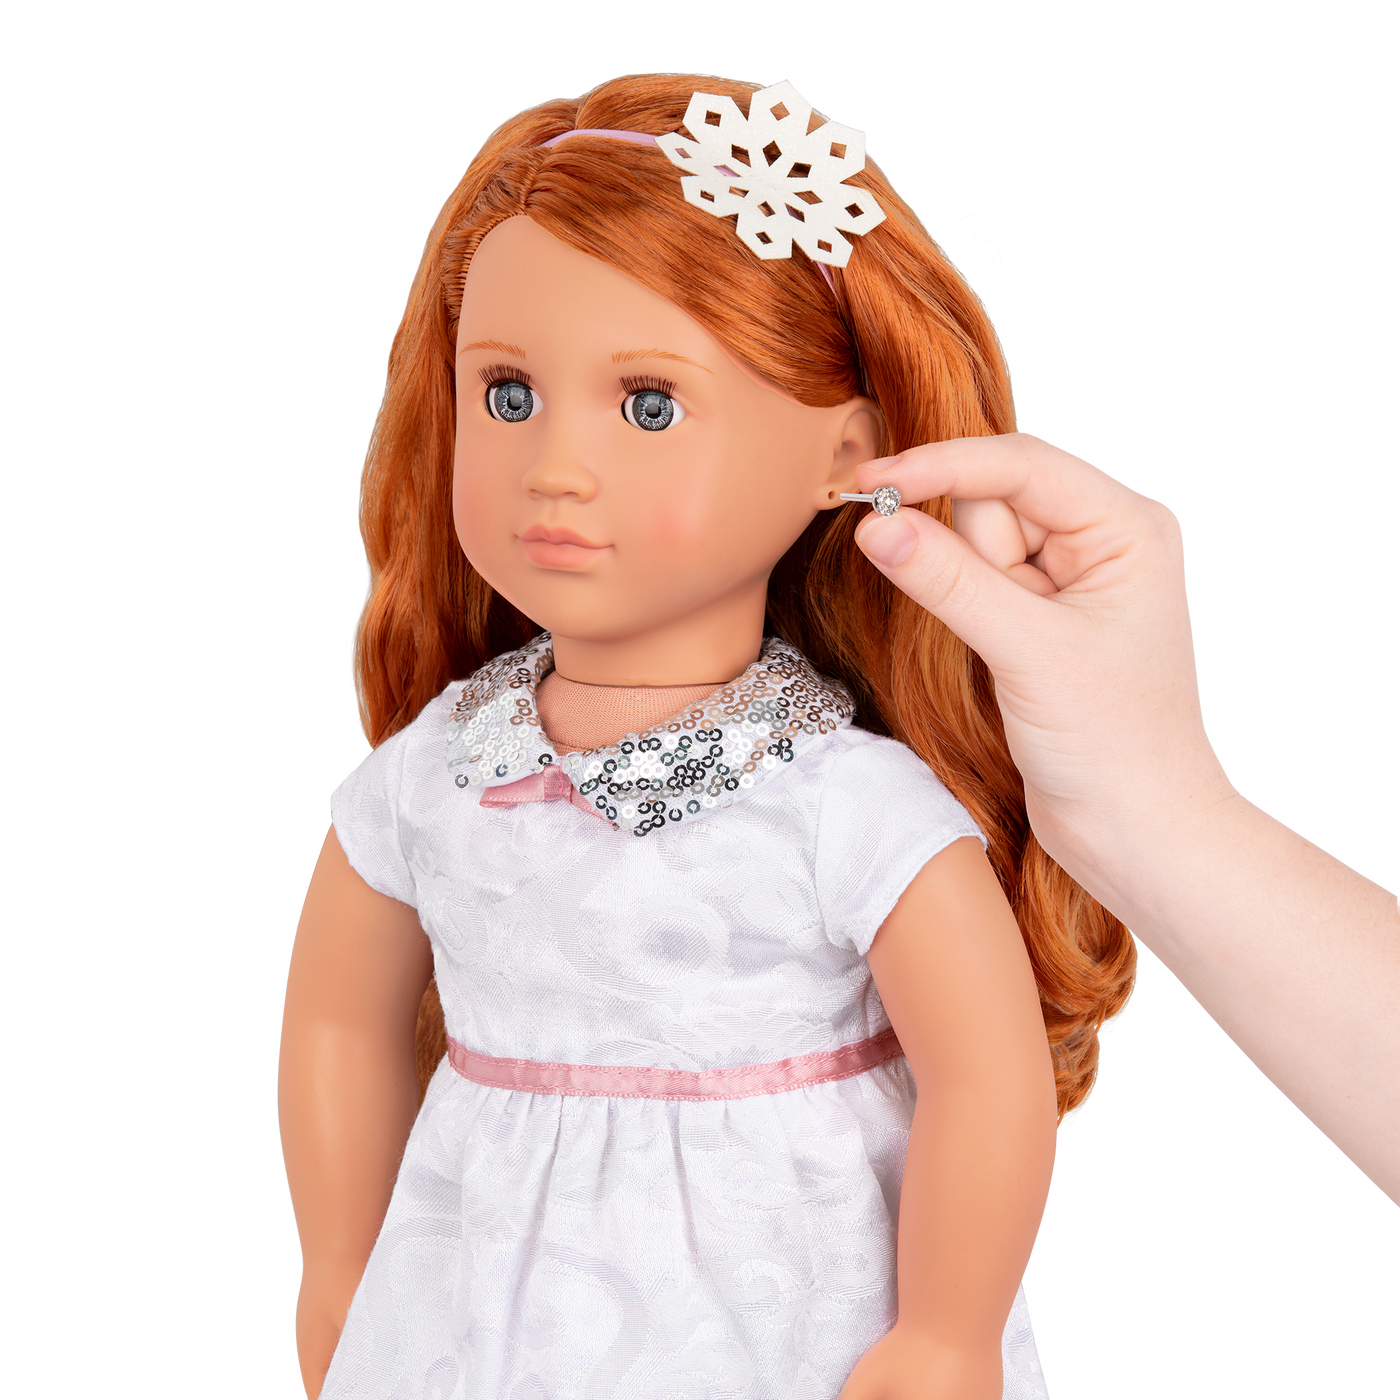 18-inch doll with red hair, blue eyes, jewelry and box